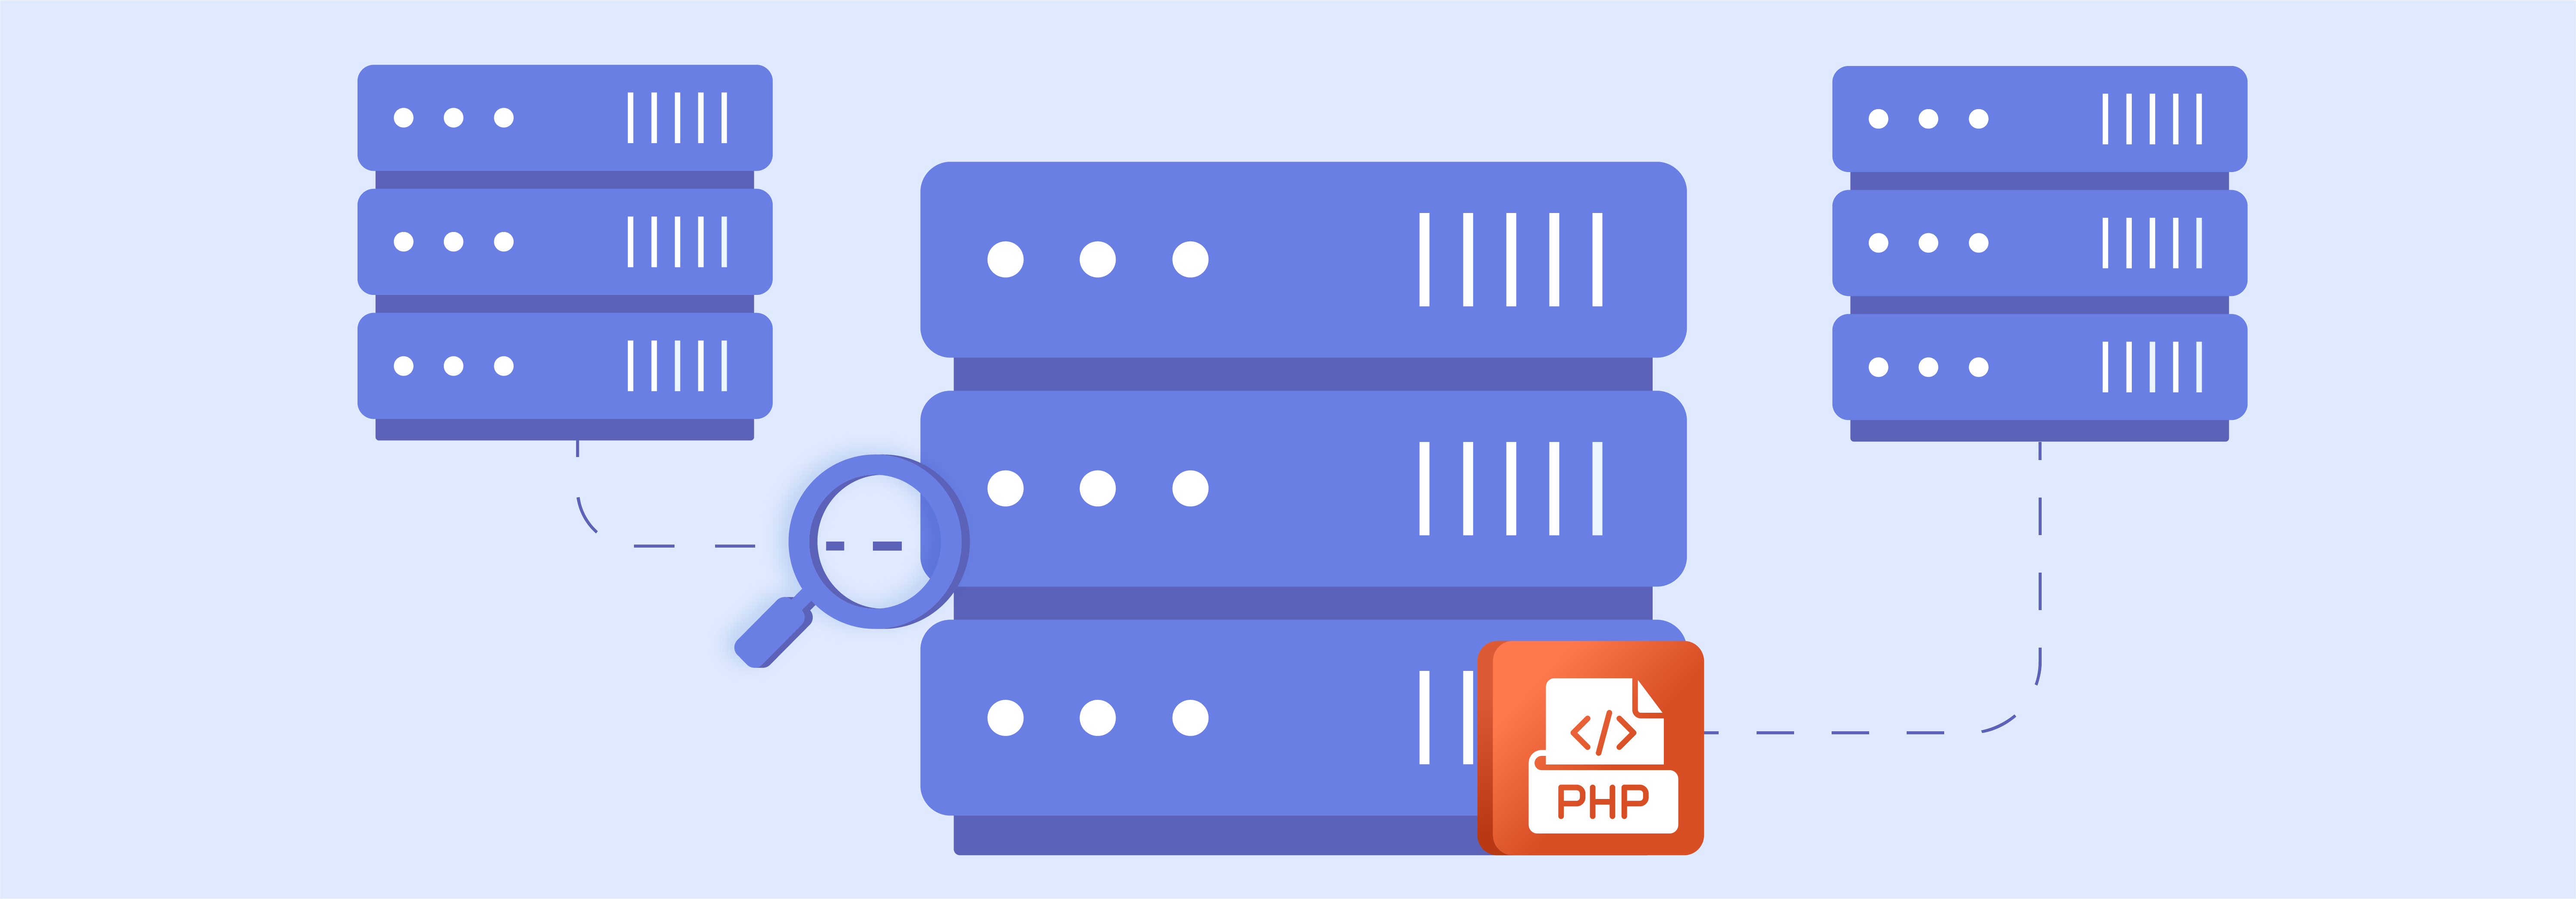 Checking for latest PHP version compatibility in Magento hosting servers